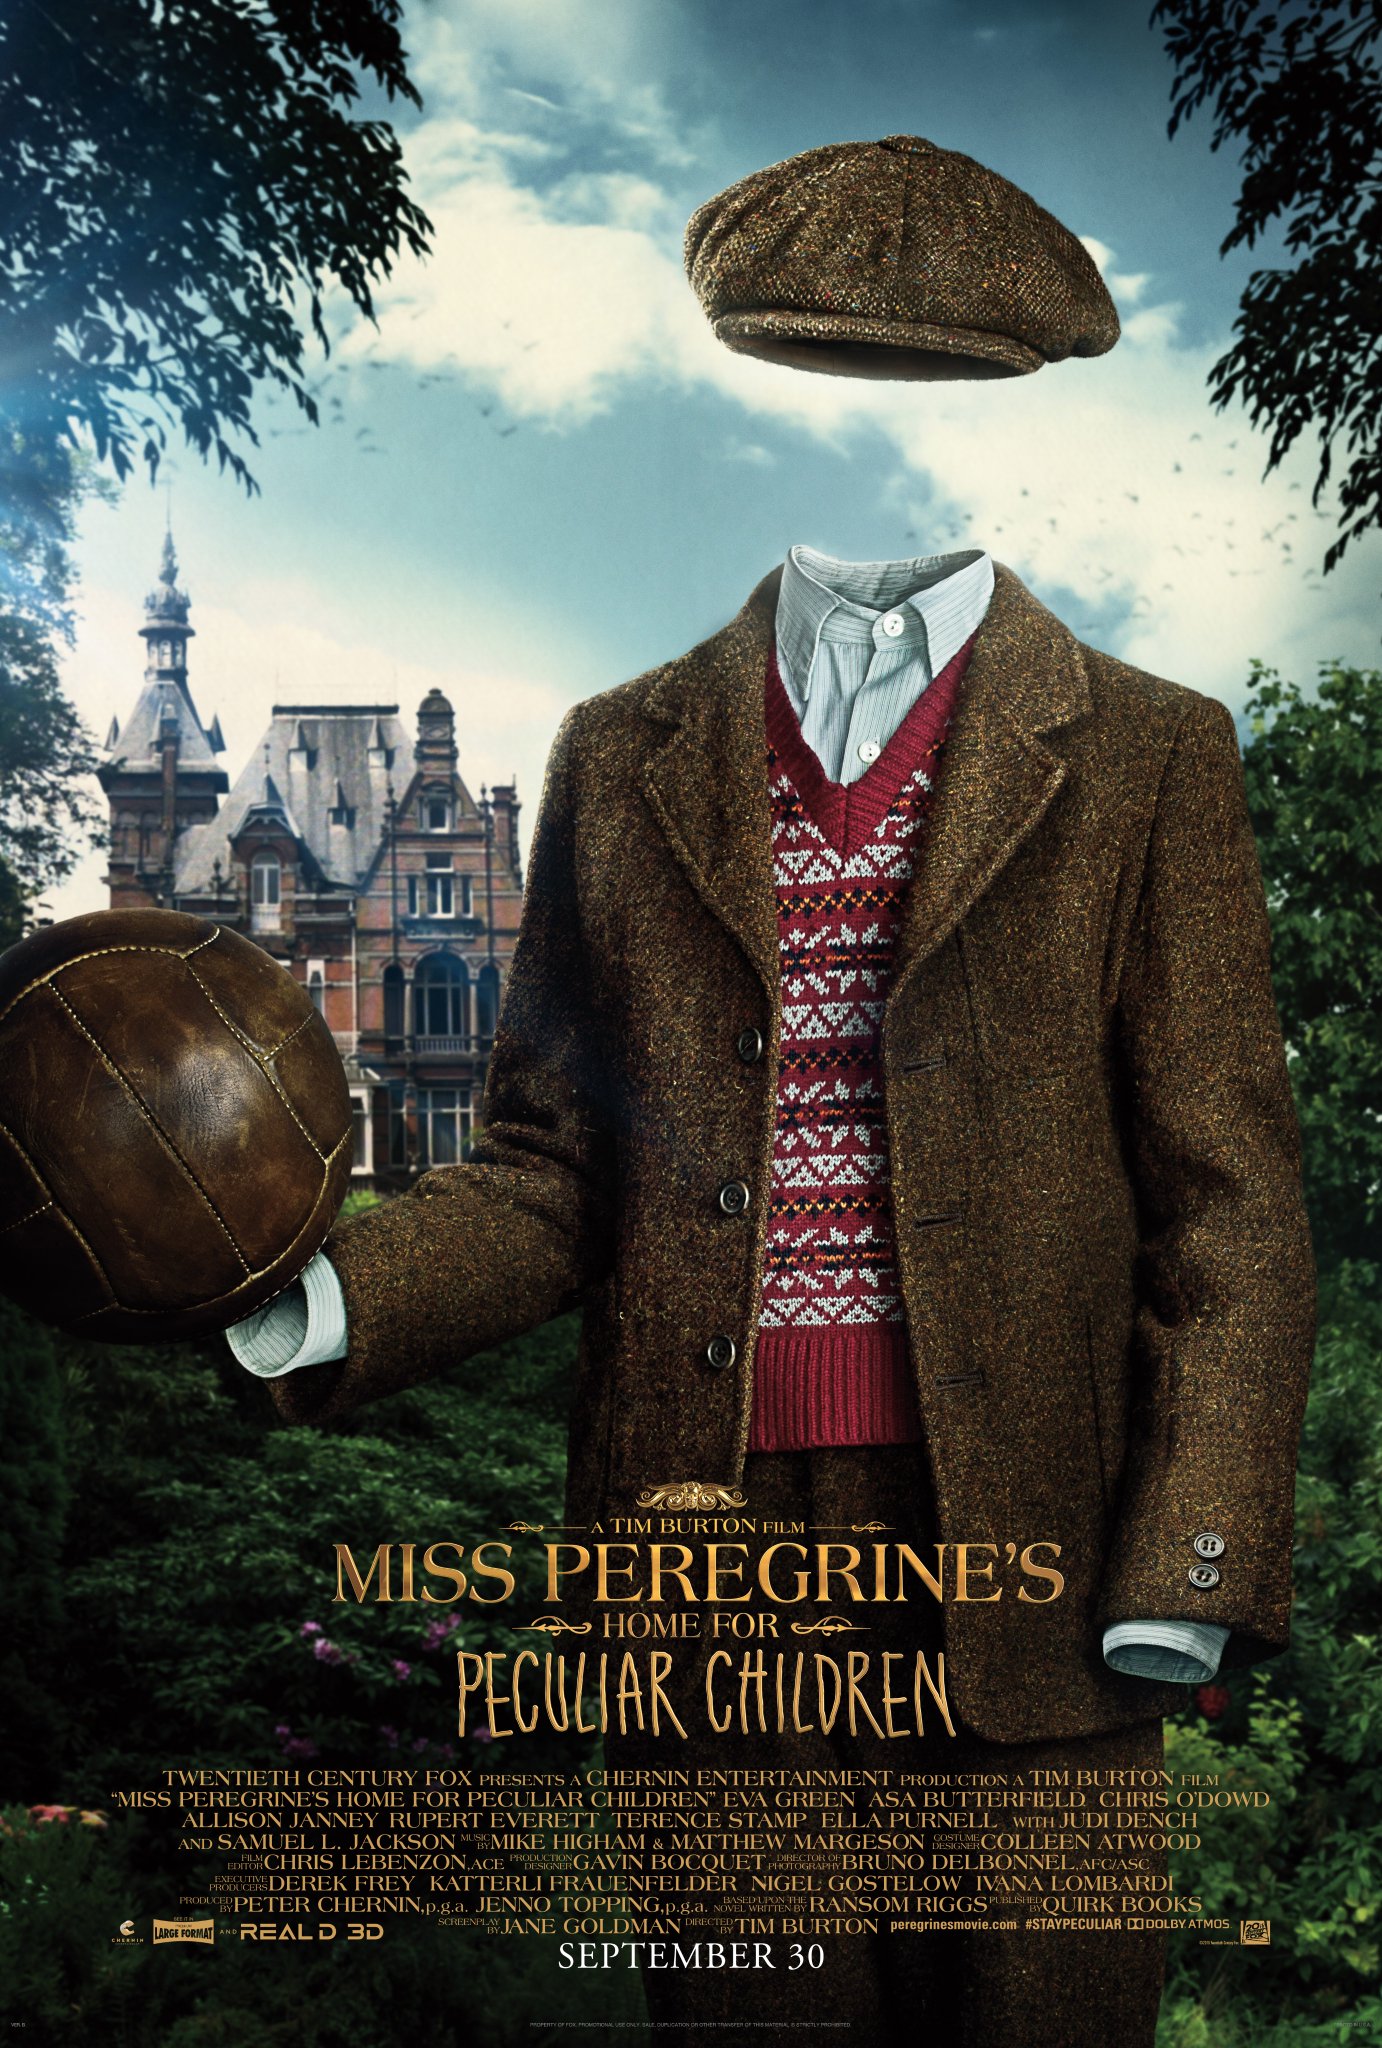 https://thefilmstage.com/wp-content/uploads/2016/06/Miss-Peregrine-poster-4.jpg